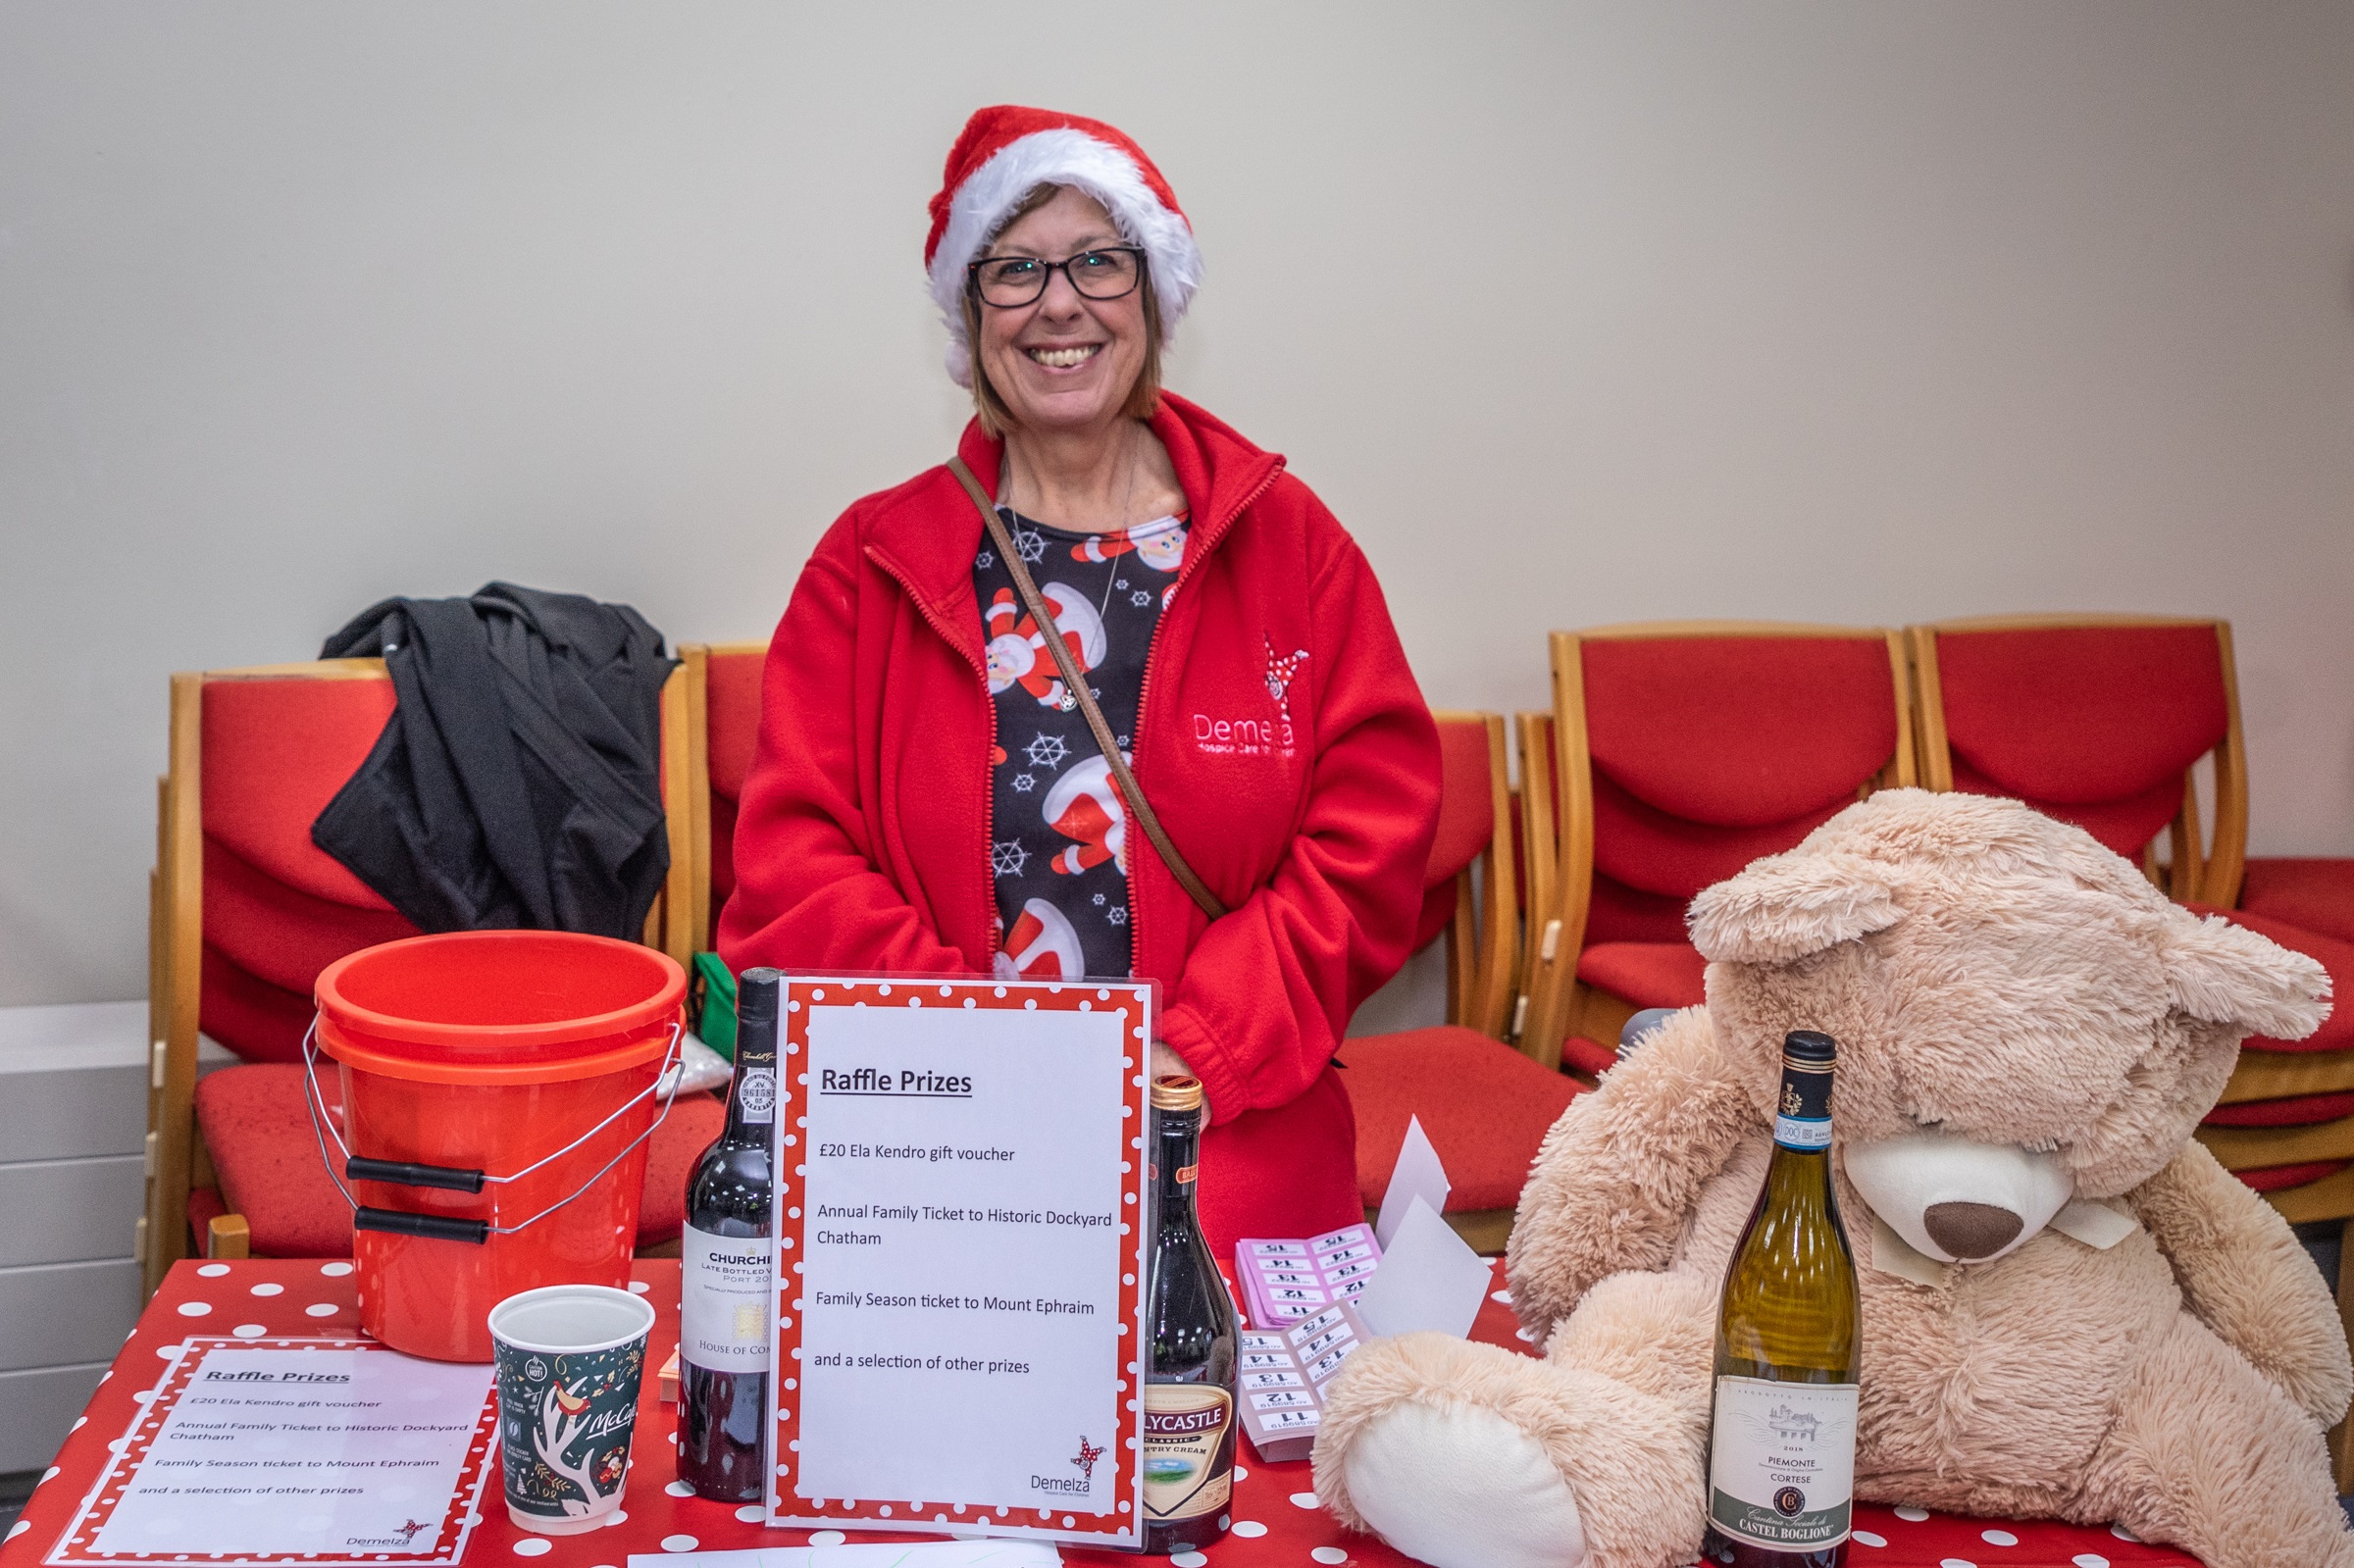 A woman stands behind her raffle table, smiling and wearing a Demelza fleece and Christmas hat.